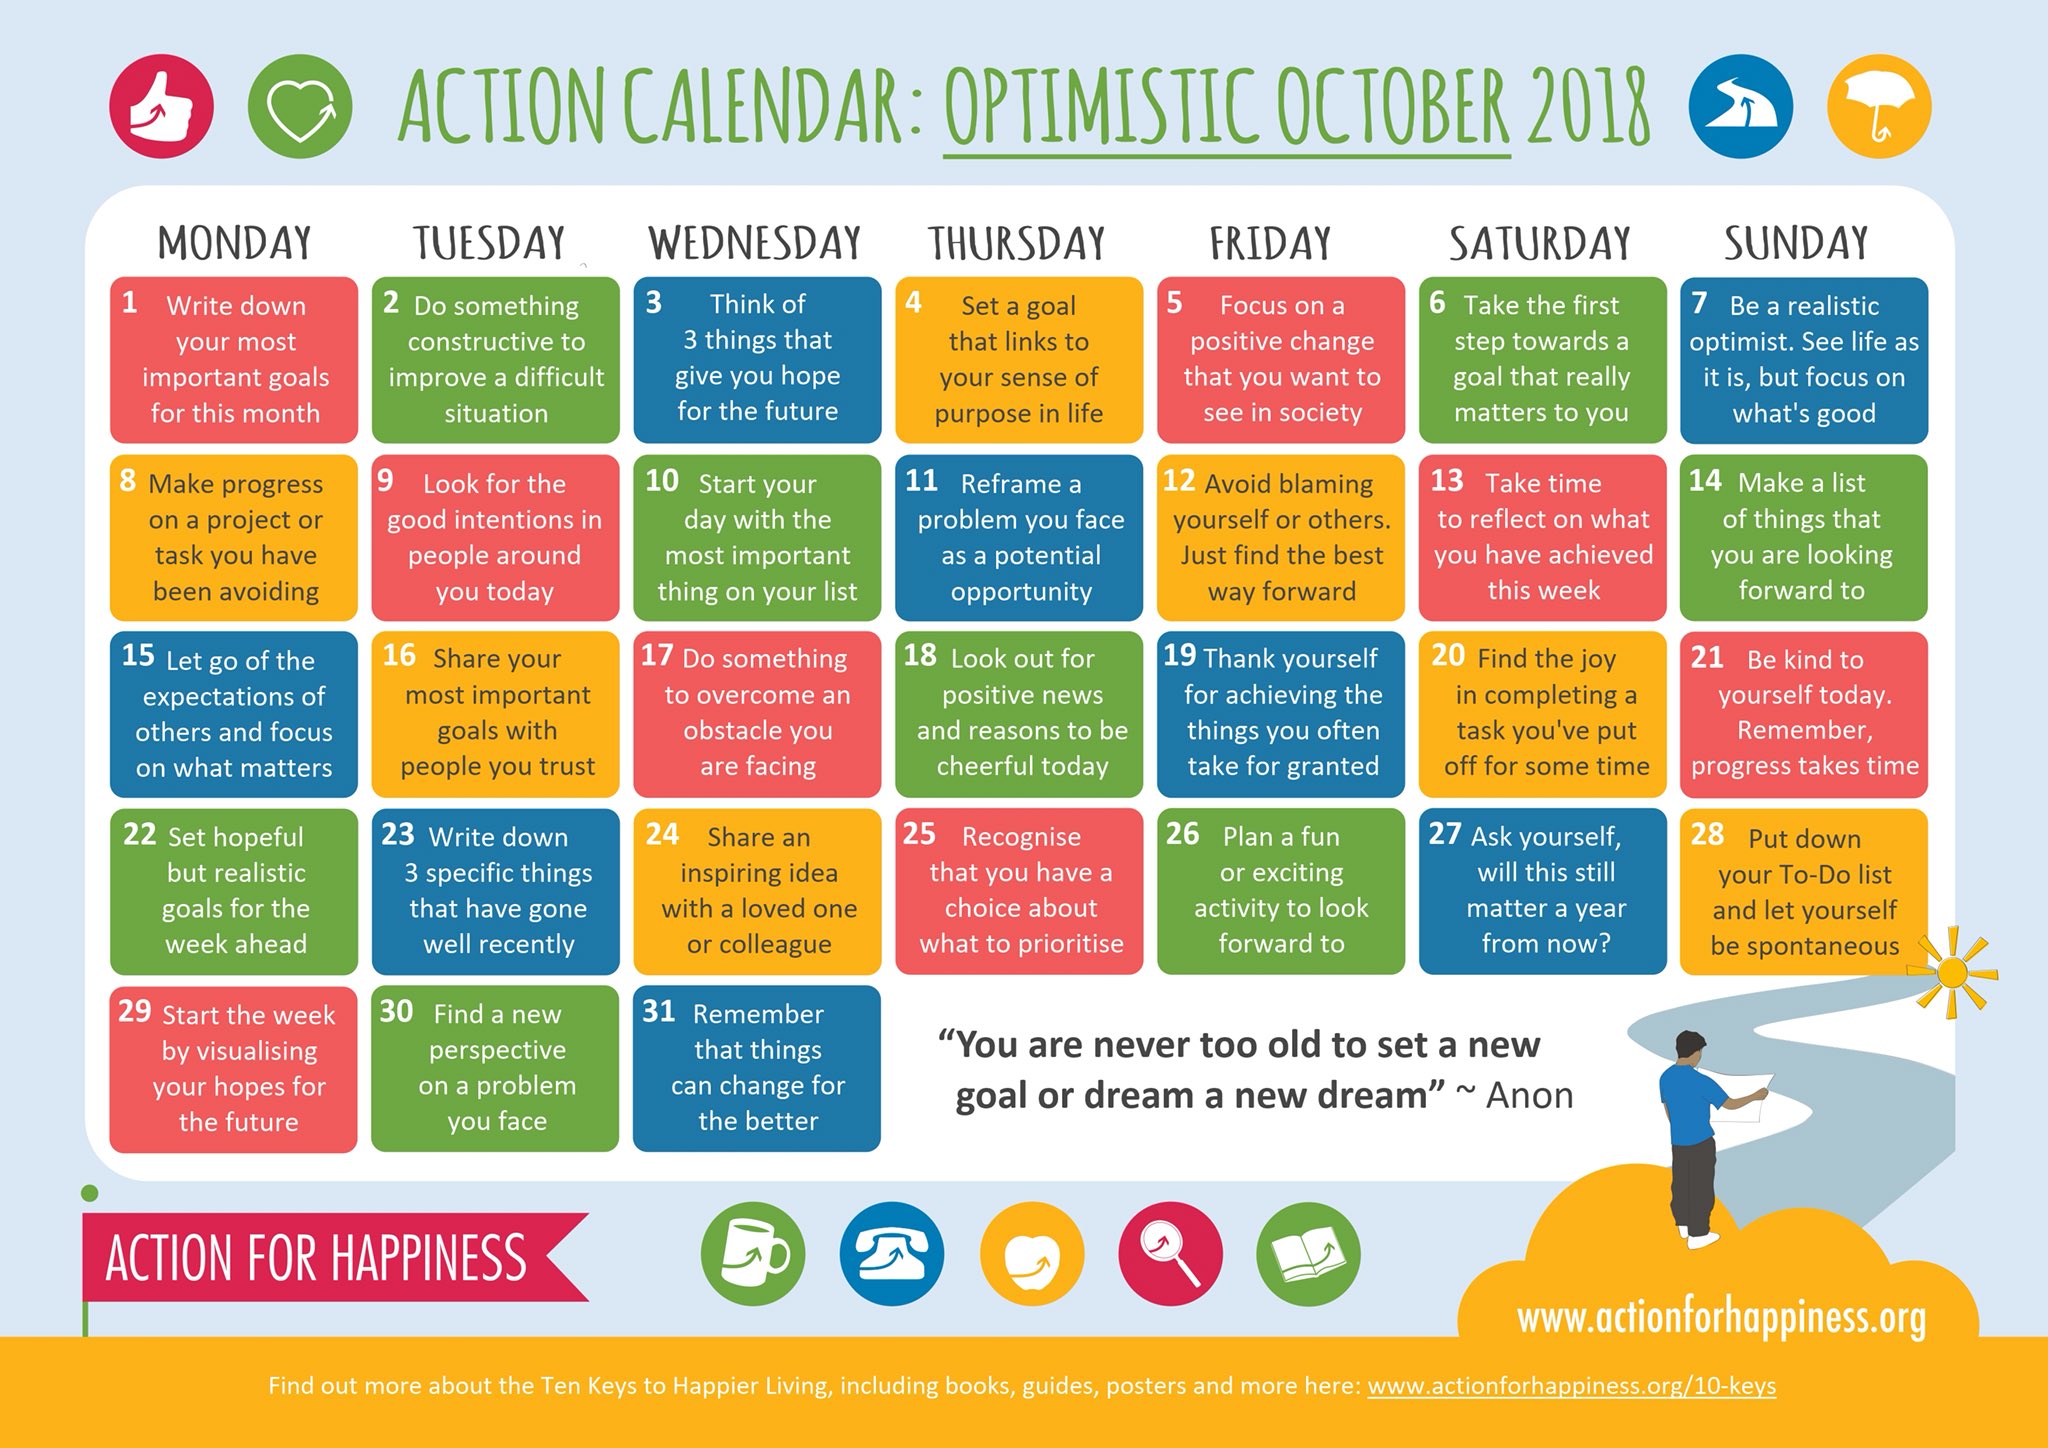 Optimistic October - Action for Happiness